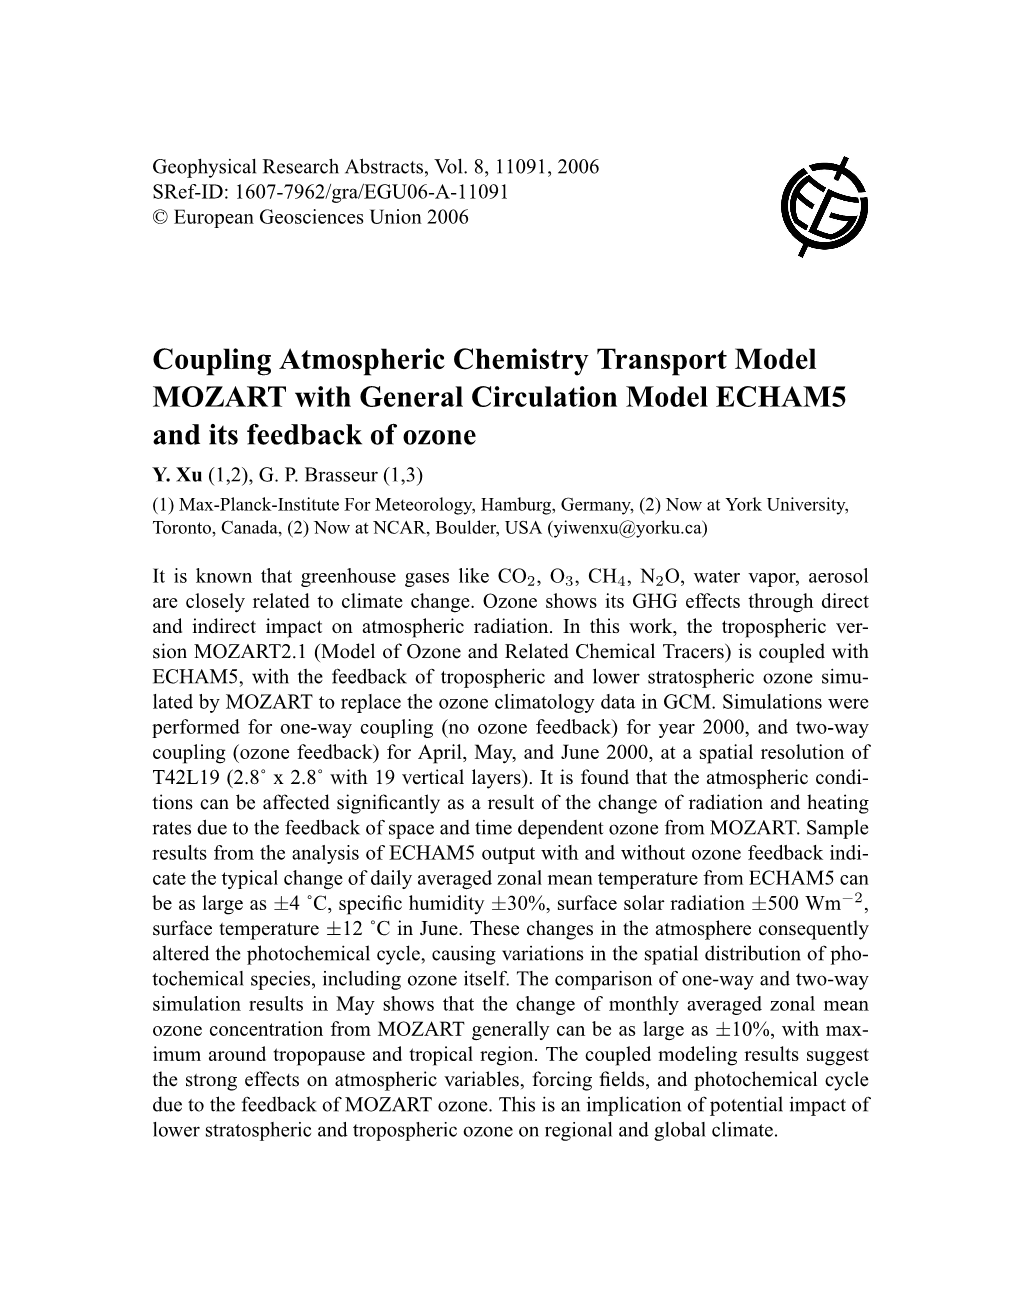 Coupling Atmospheric Chemistry Transport Model MOZART with General Circulation Model ECHAM5 and Its Feedback of Ozone Y